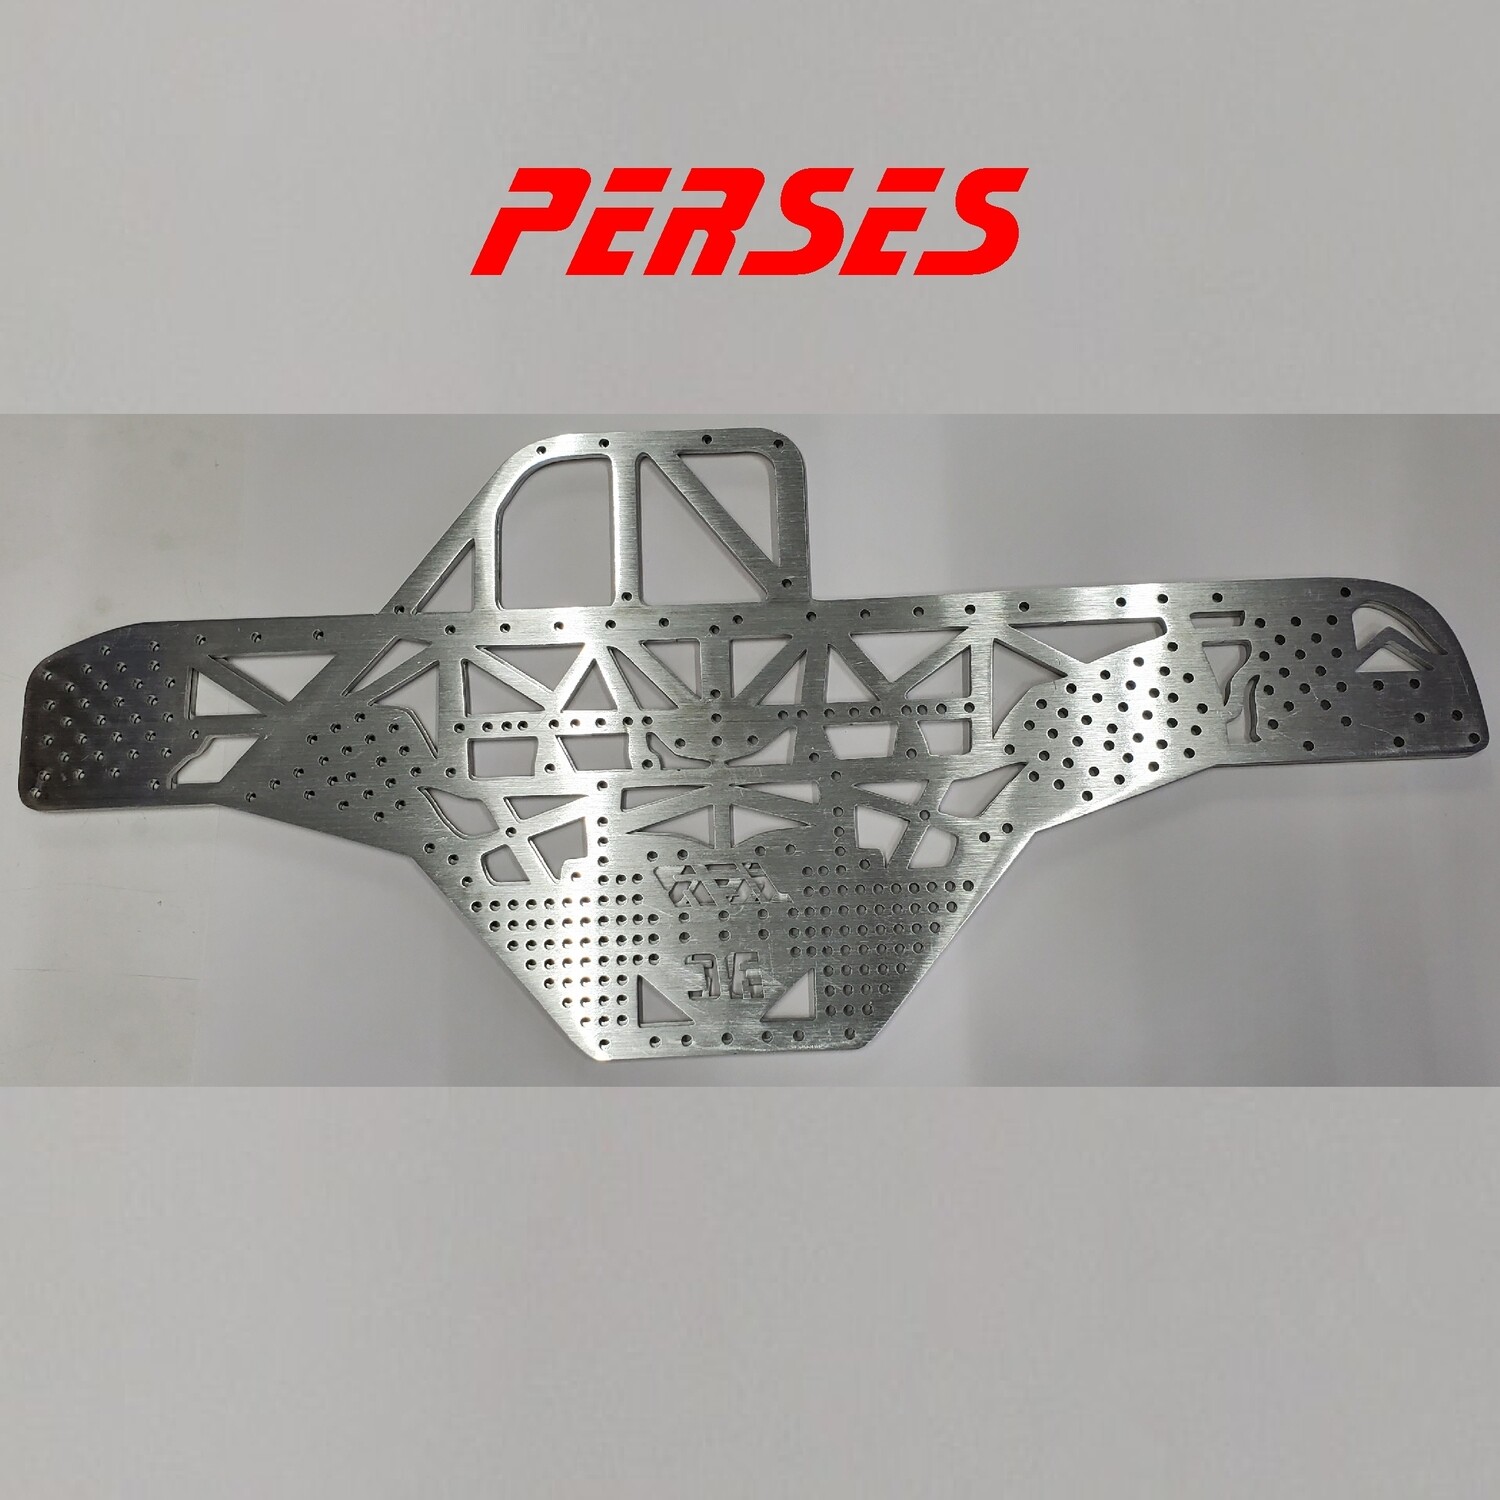 PERSES Truck Chassis (SMT)